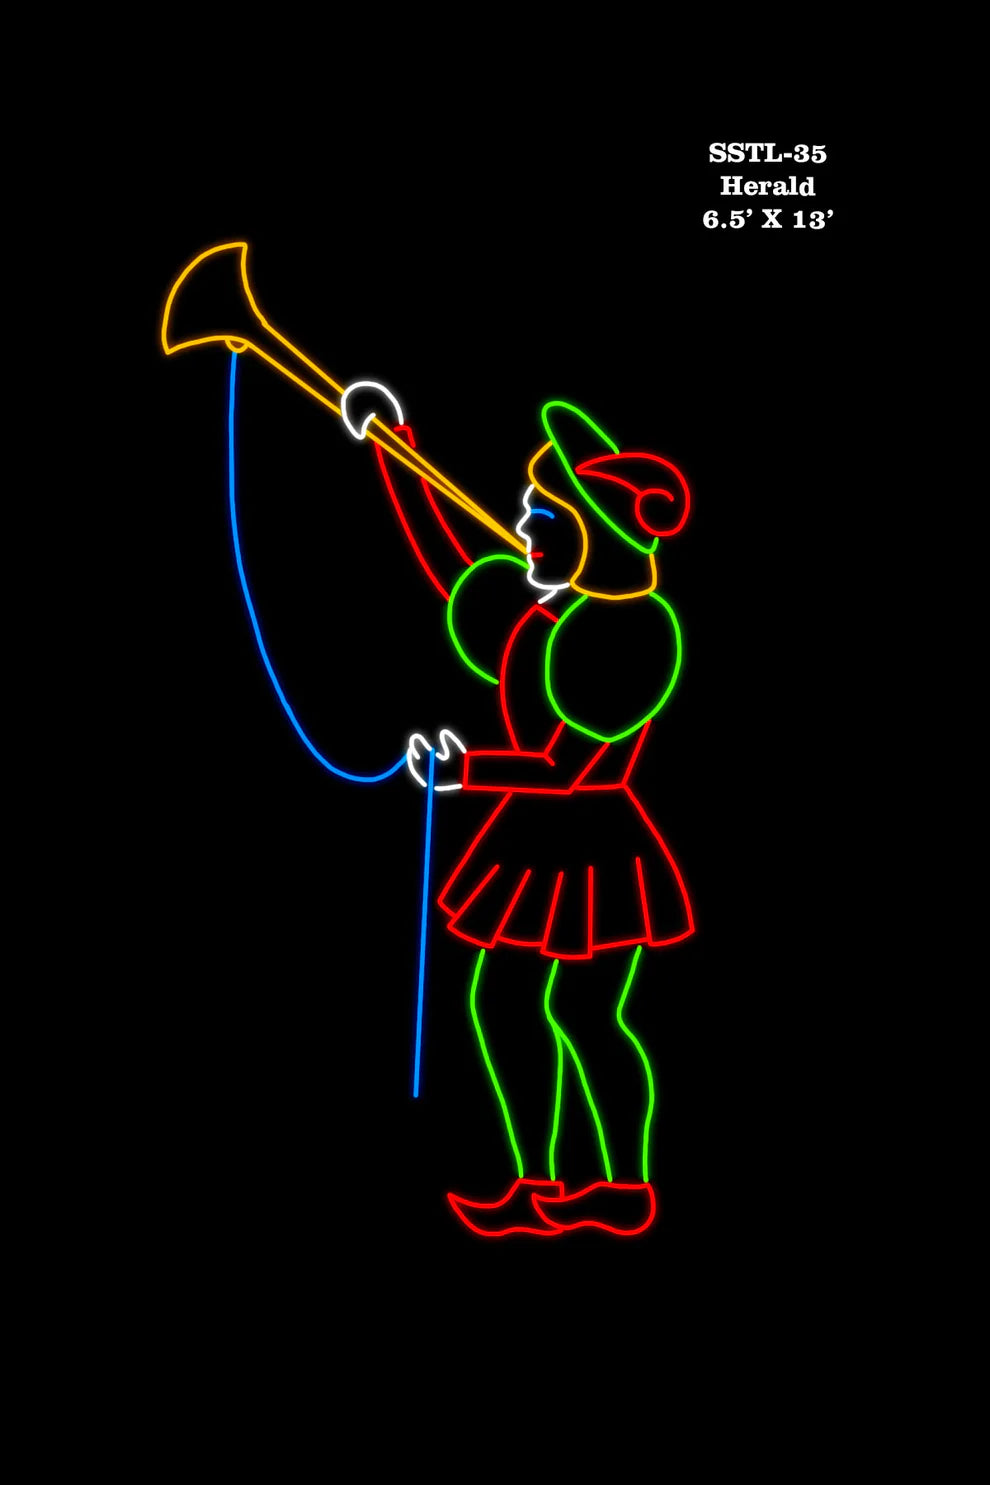 This silhouette portrays a figure of a herald, a traditional messenger or announcer, depicted in a dynamic pose of blowing a large trumpet. The figure is outlined in bright LED lights of various colors: the trumpet in yellow, the cord of the trumpet in blue, the hat and part of the outfit in red, and the rest of the garment and legs in green. 